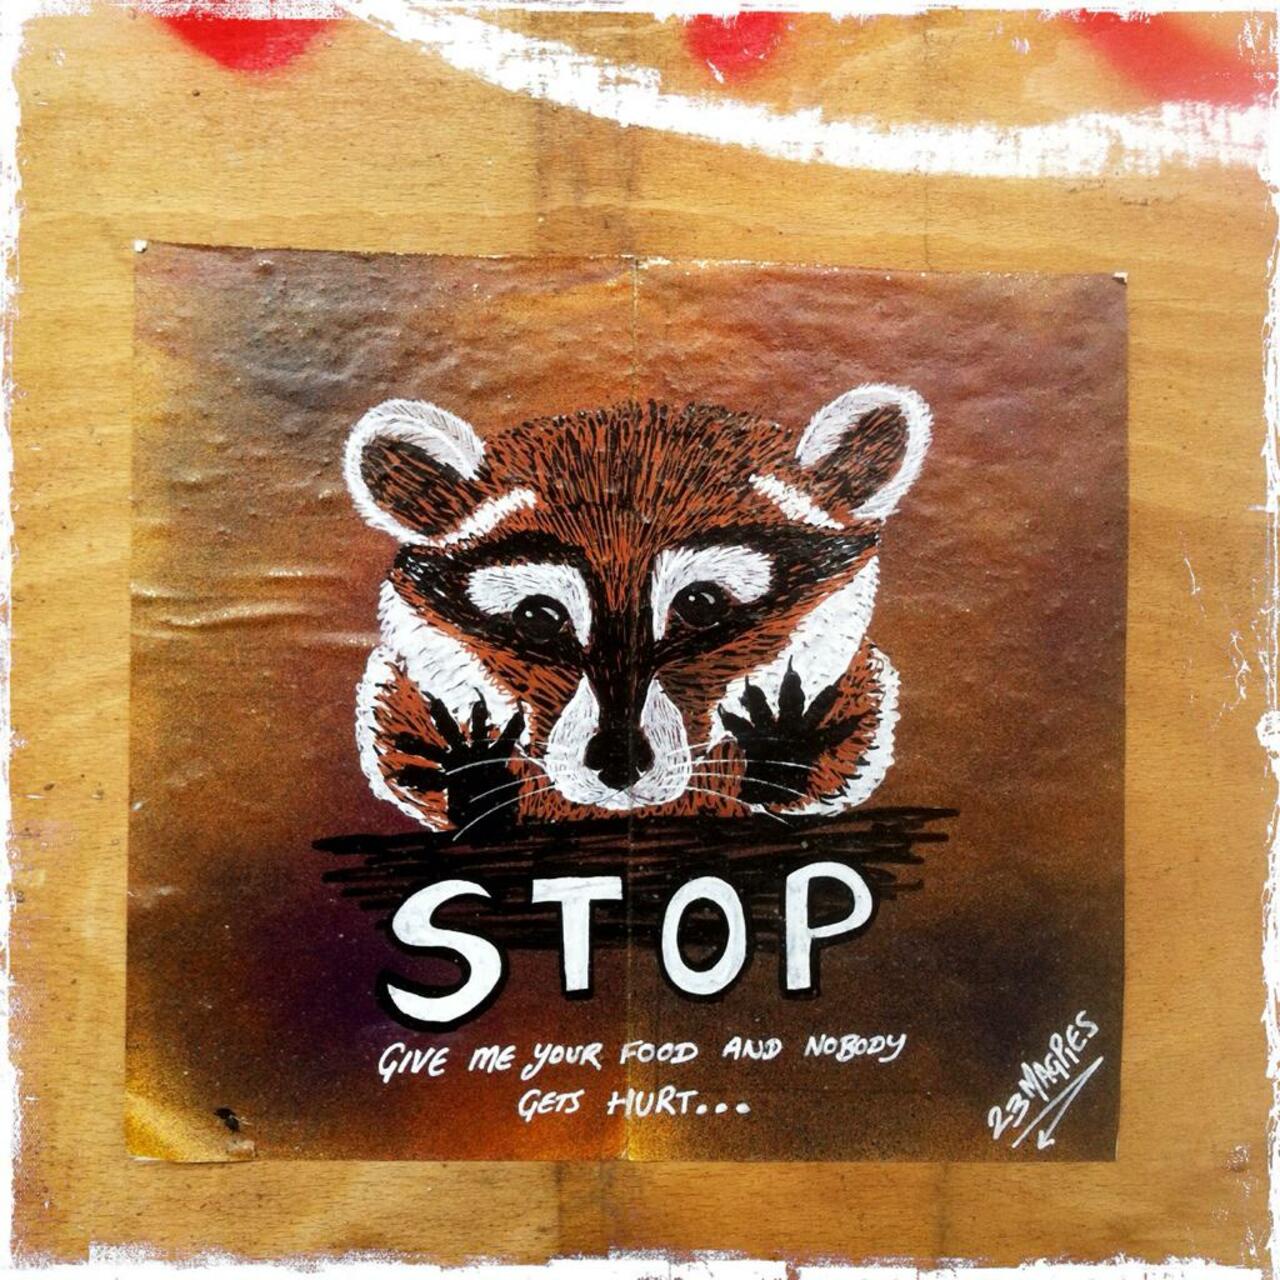 RT @BrickLaneArt: STOP: Give me your food and nobody gets hurt

#23Magpies paste-up on Grimsby Street #art #streetart #graffiti http://t.co/77ovH0KMIa